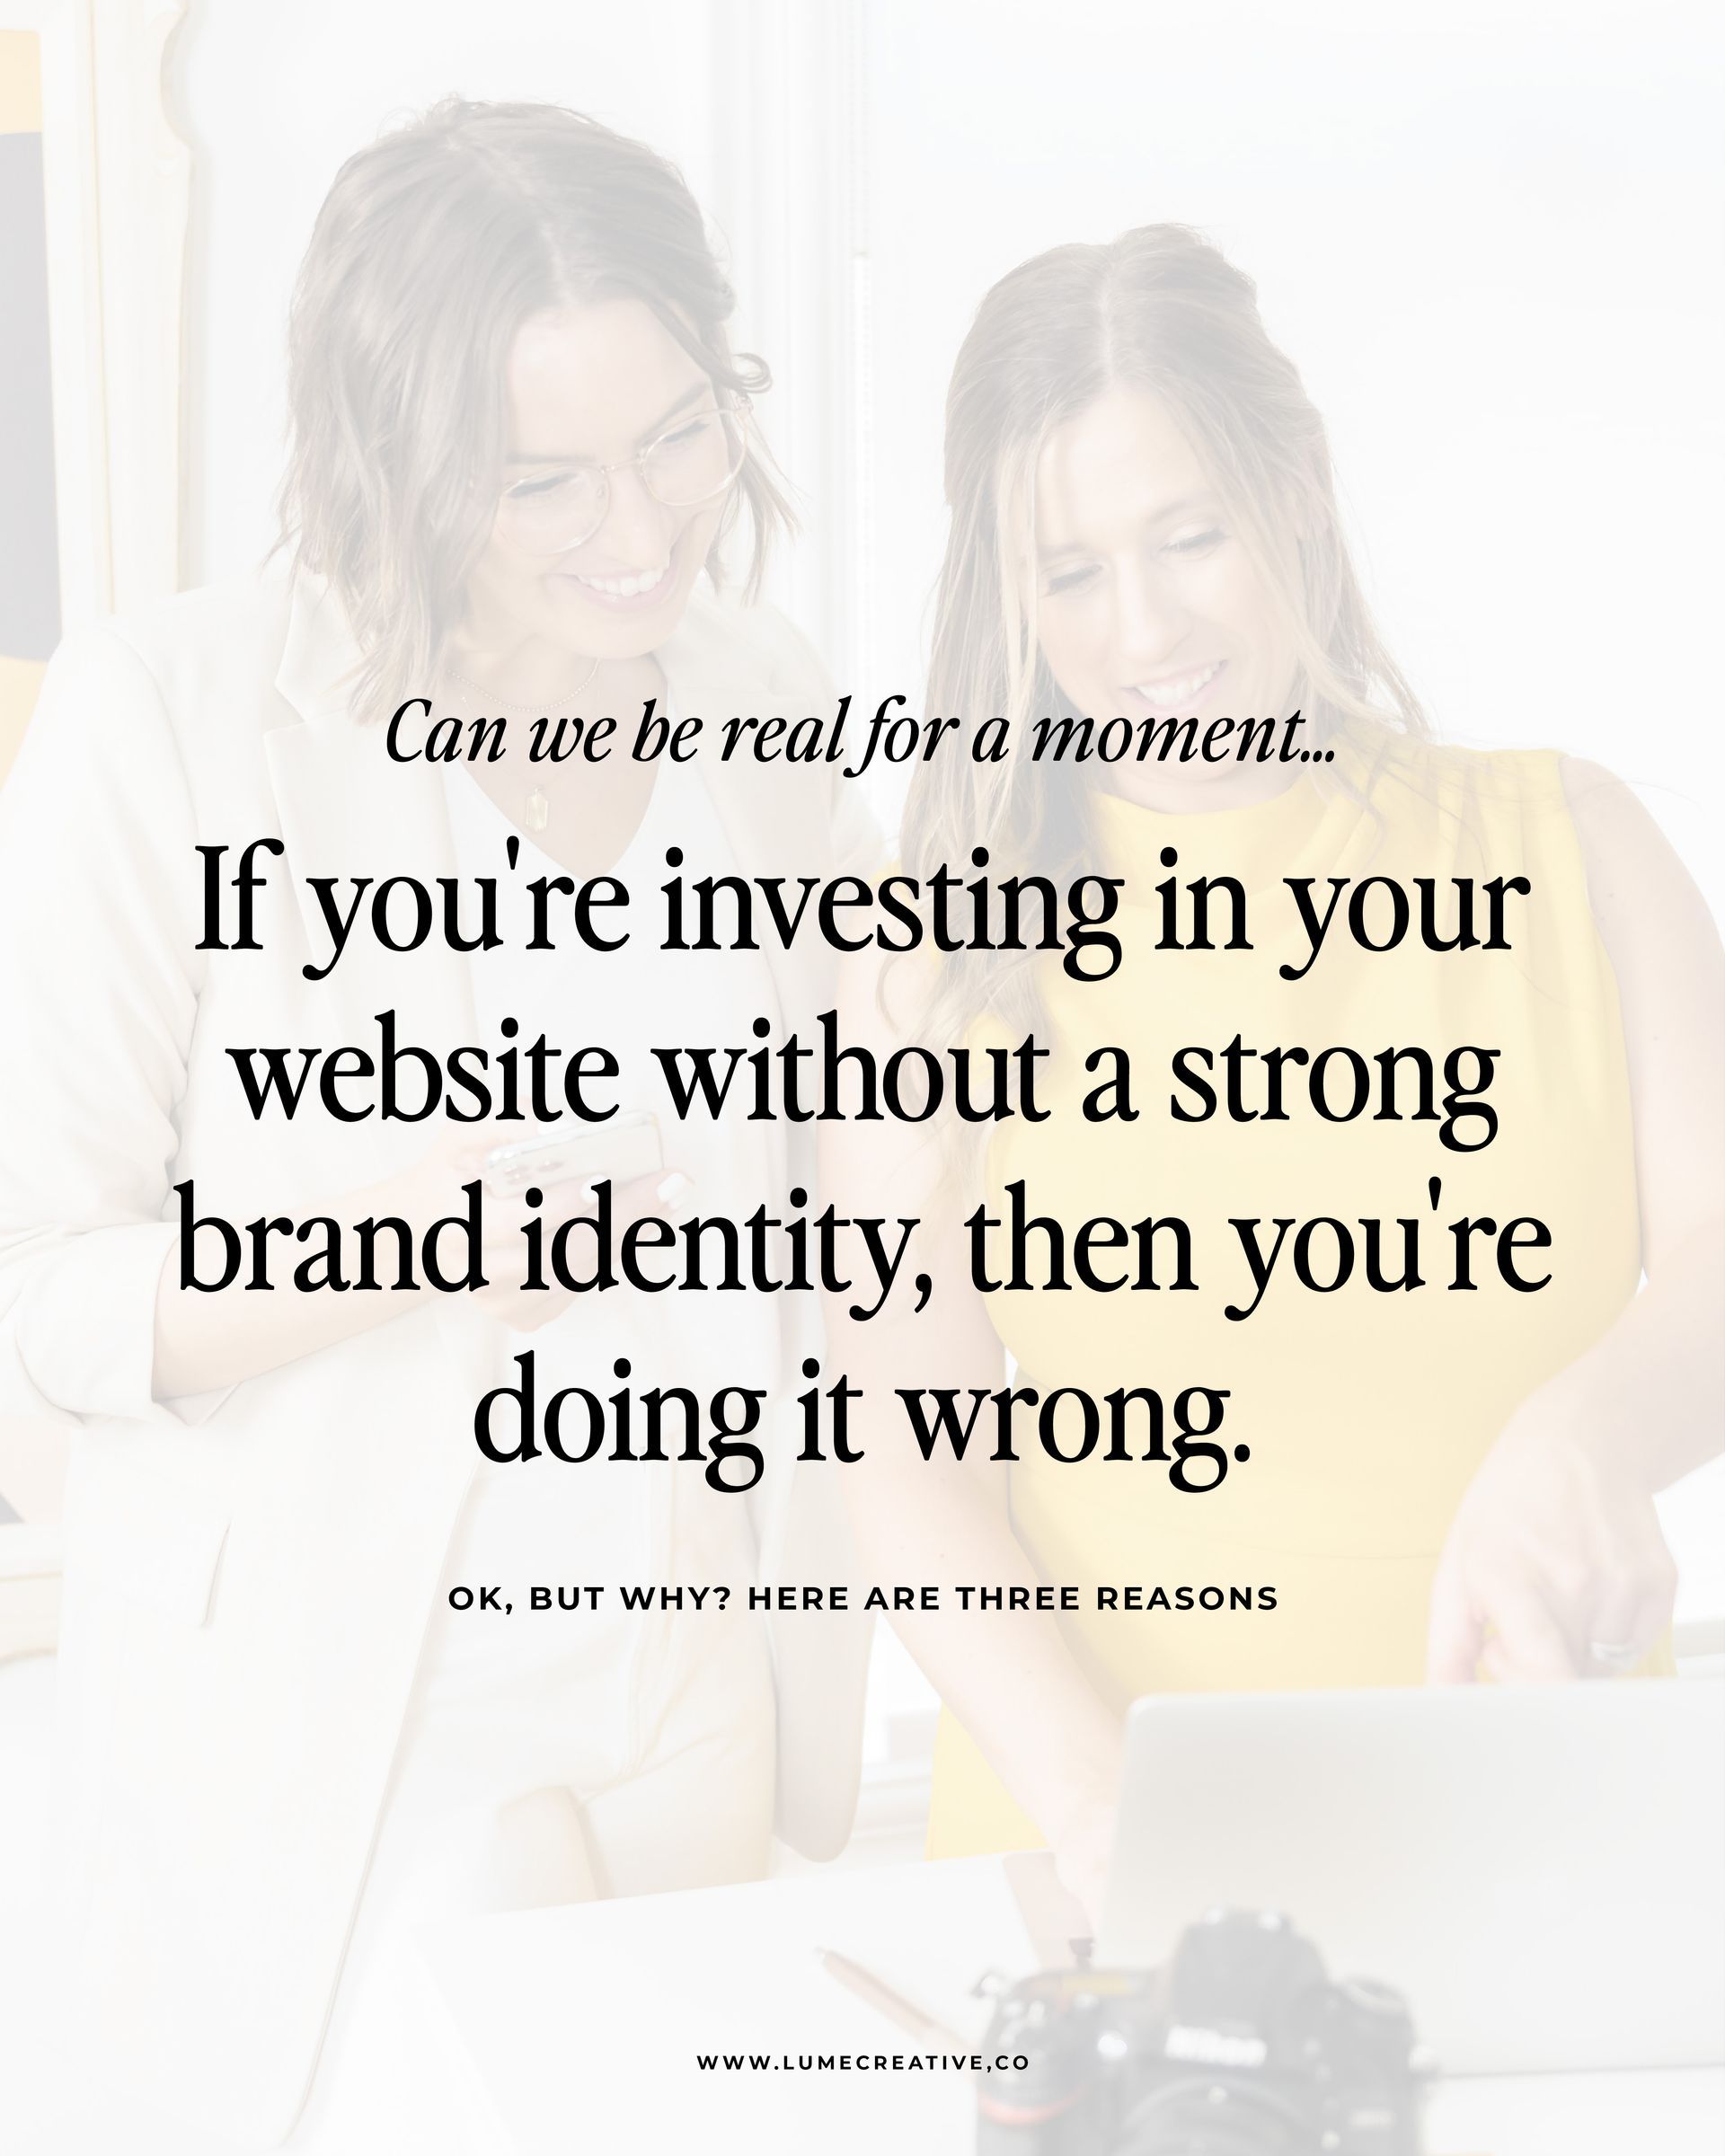 If you 're investing in your website without a strong brand identity , then you 're doing it wrong.